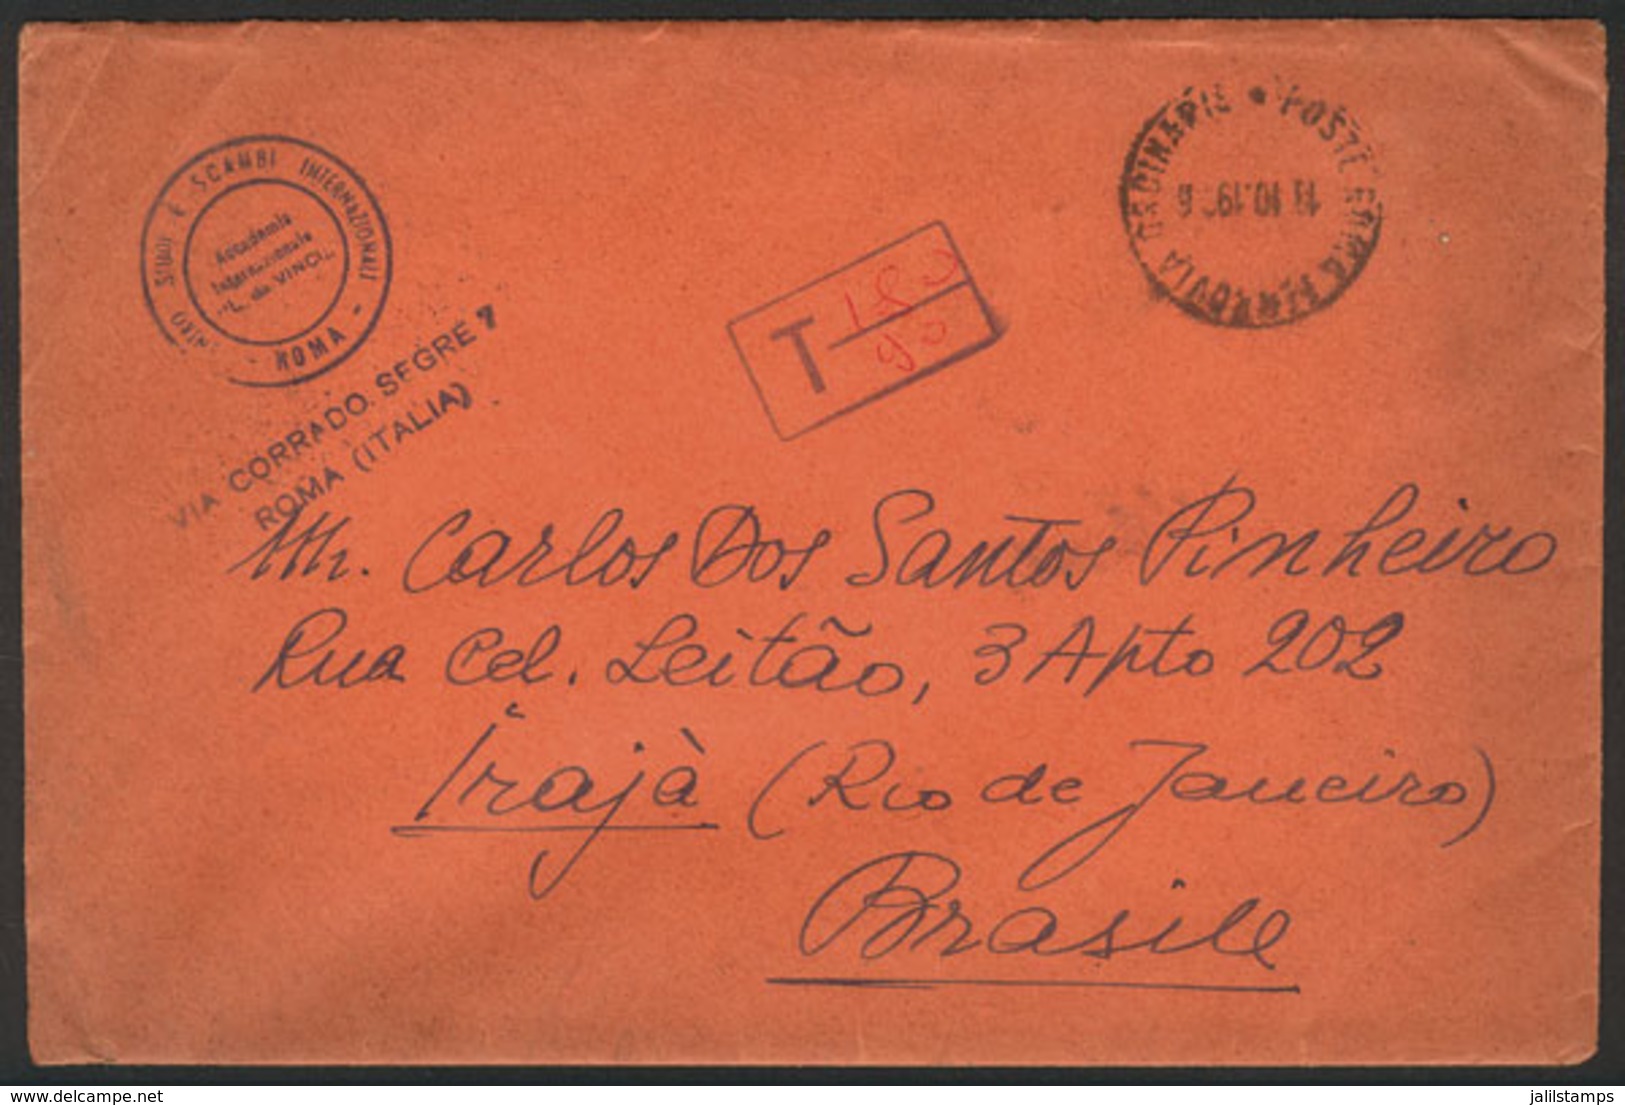 ITALY: Unsealed Cover (it Contained Printed Matter) Sent STAMPLESS From Roma To Brazil On 13/OC/1936, With Interesting D - Non Classés